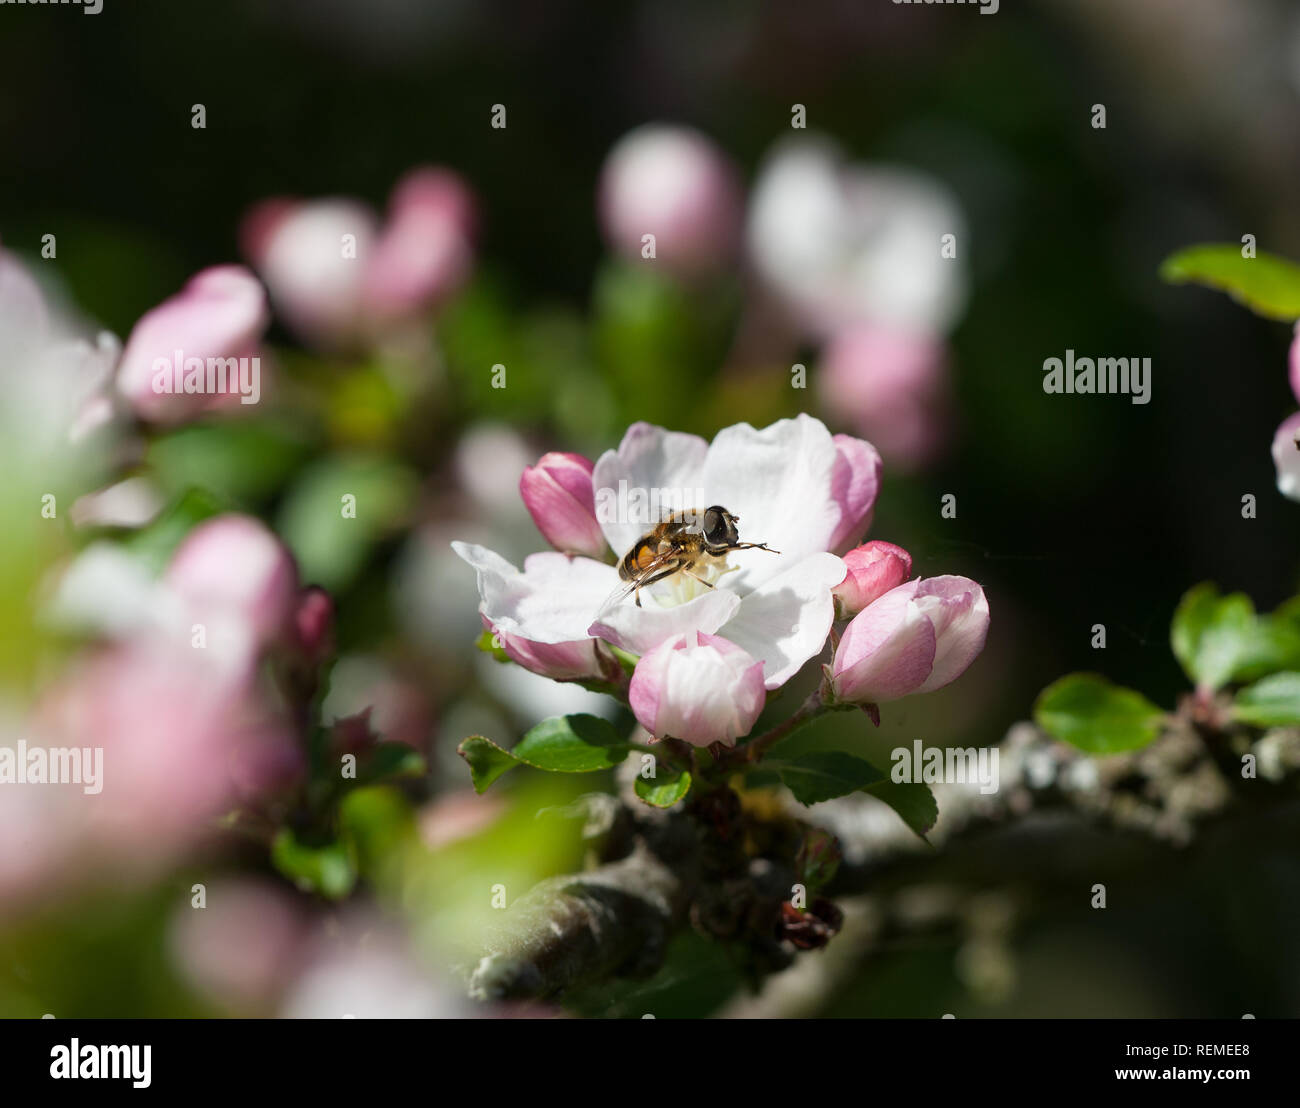 Hoverfly sur le crabe Apple Blossom Banque D'Images